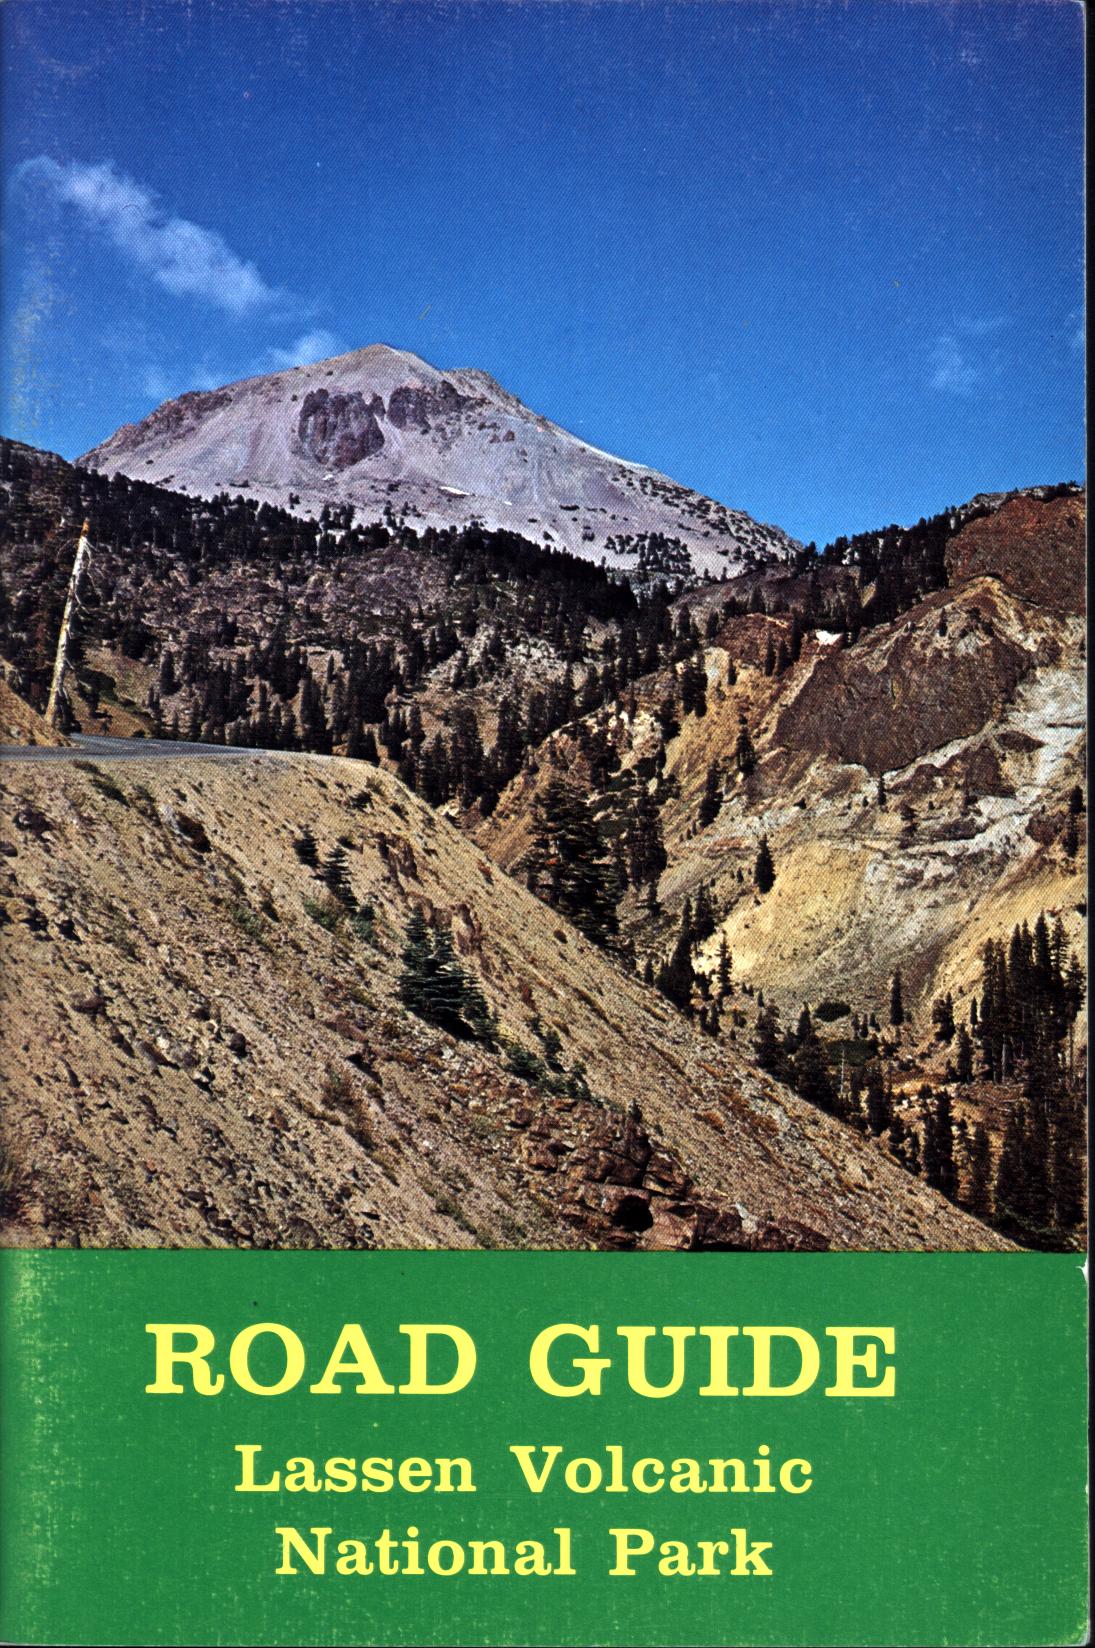 ROAD GUIDE TO LASSEN VOLCANIC NATIONAL PARK. by Paul E. Schulz. 